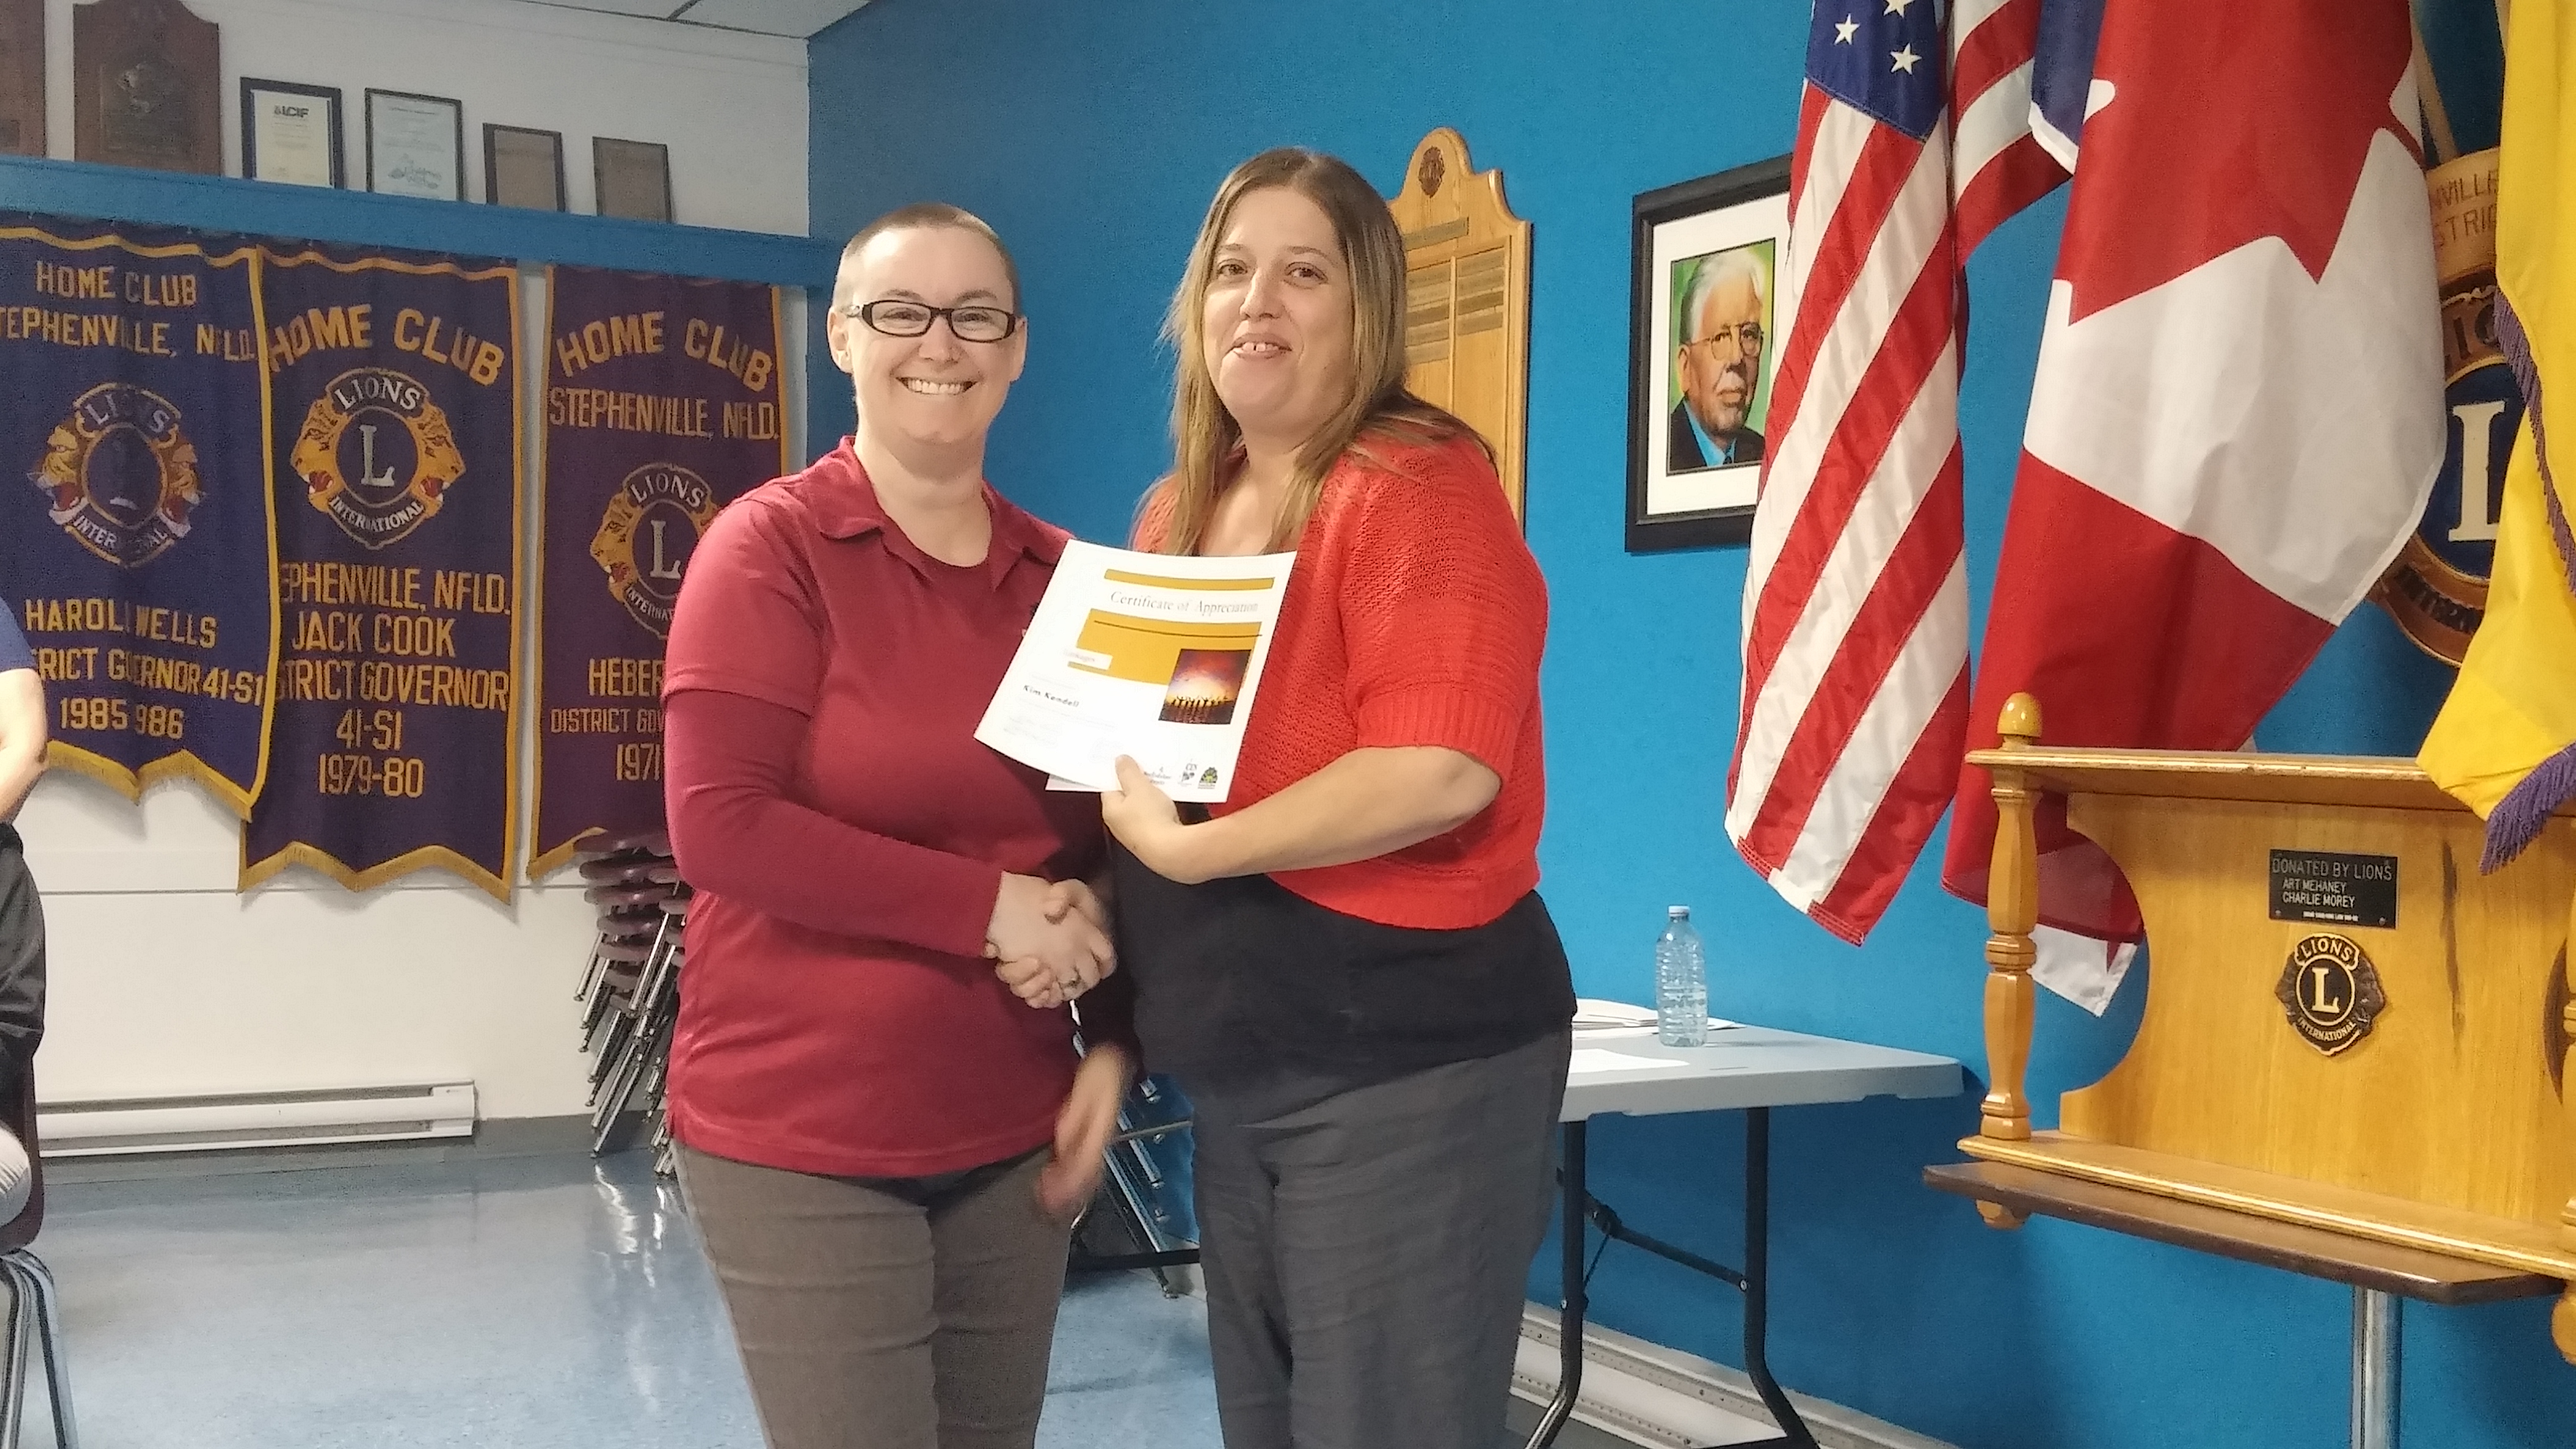 Kim Kendell, Youth Outreach Worker with Mental Health & Addictions, receiving Certificate of Appreci